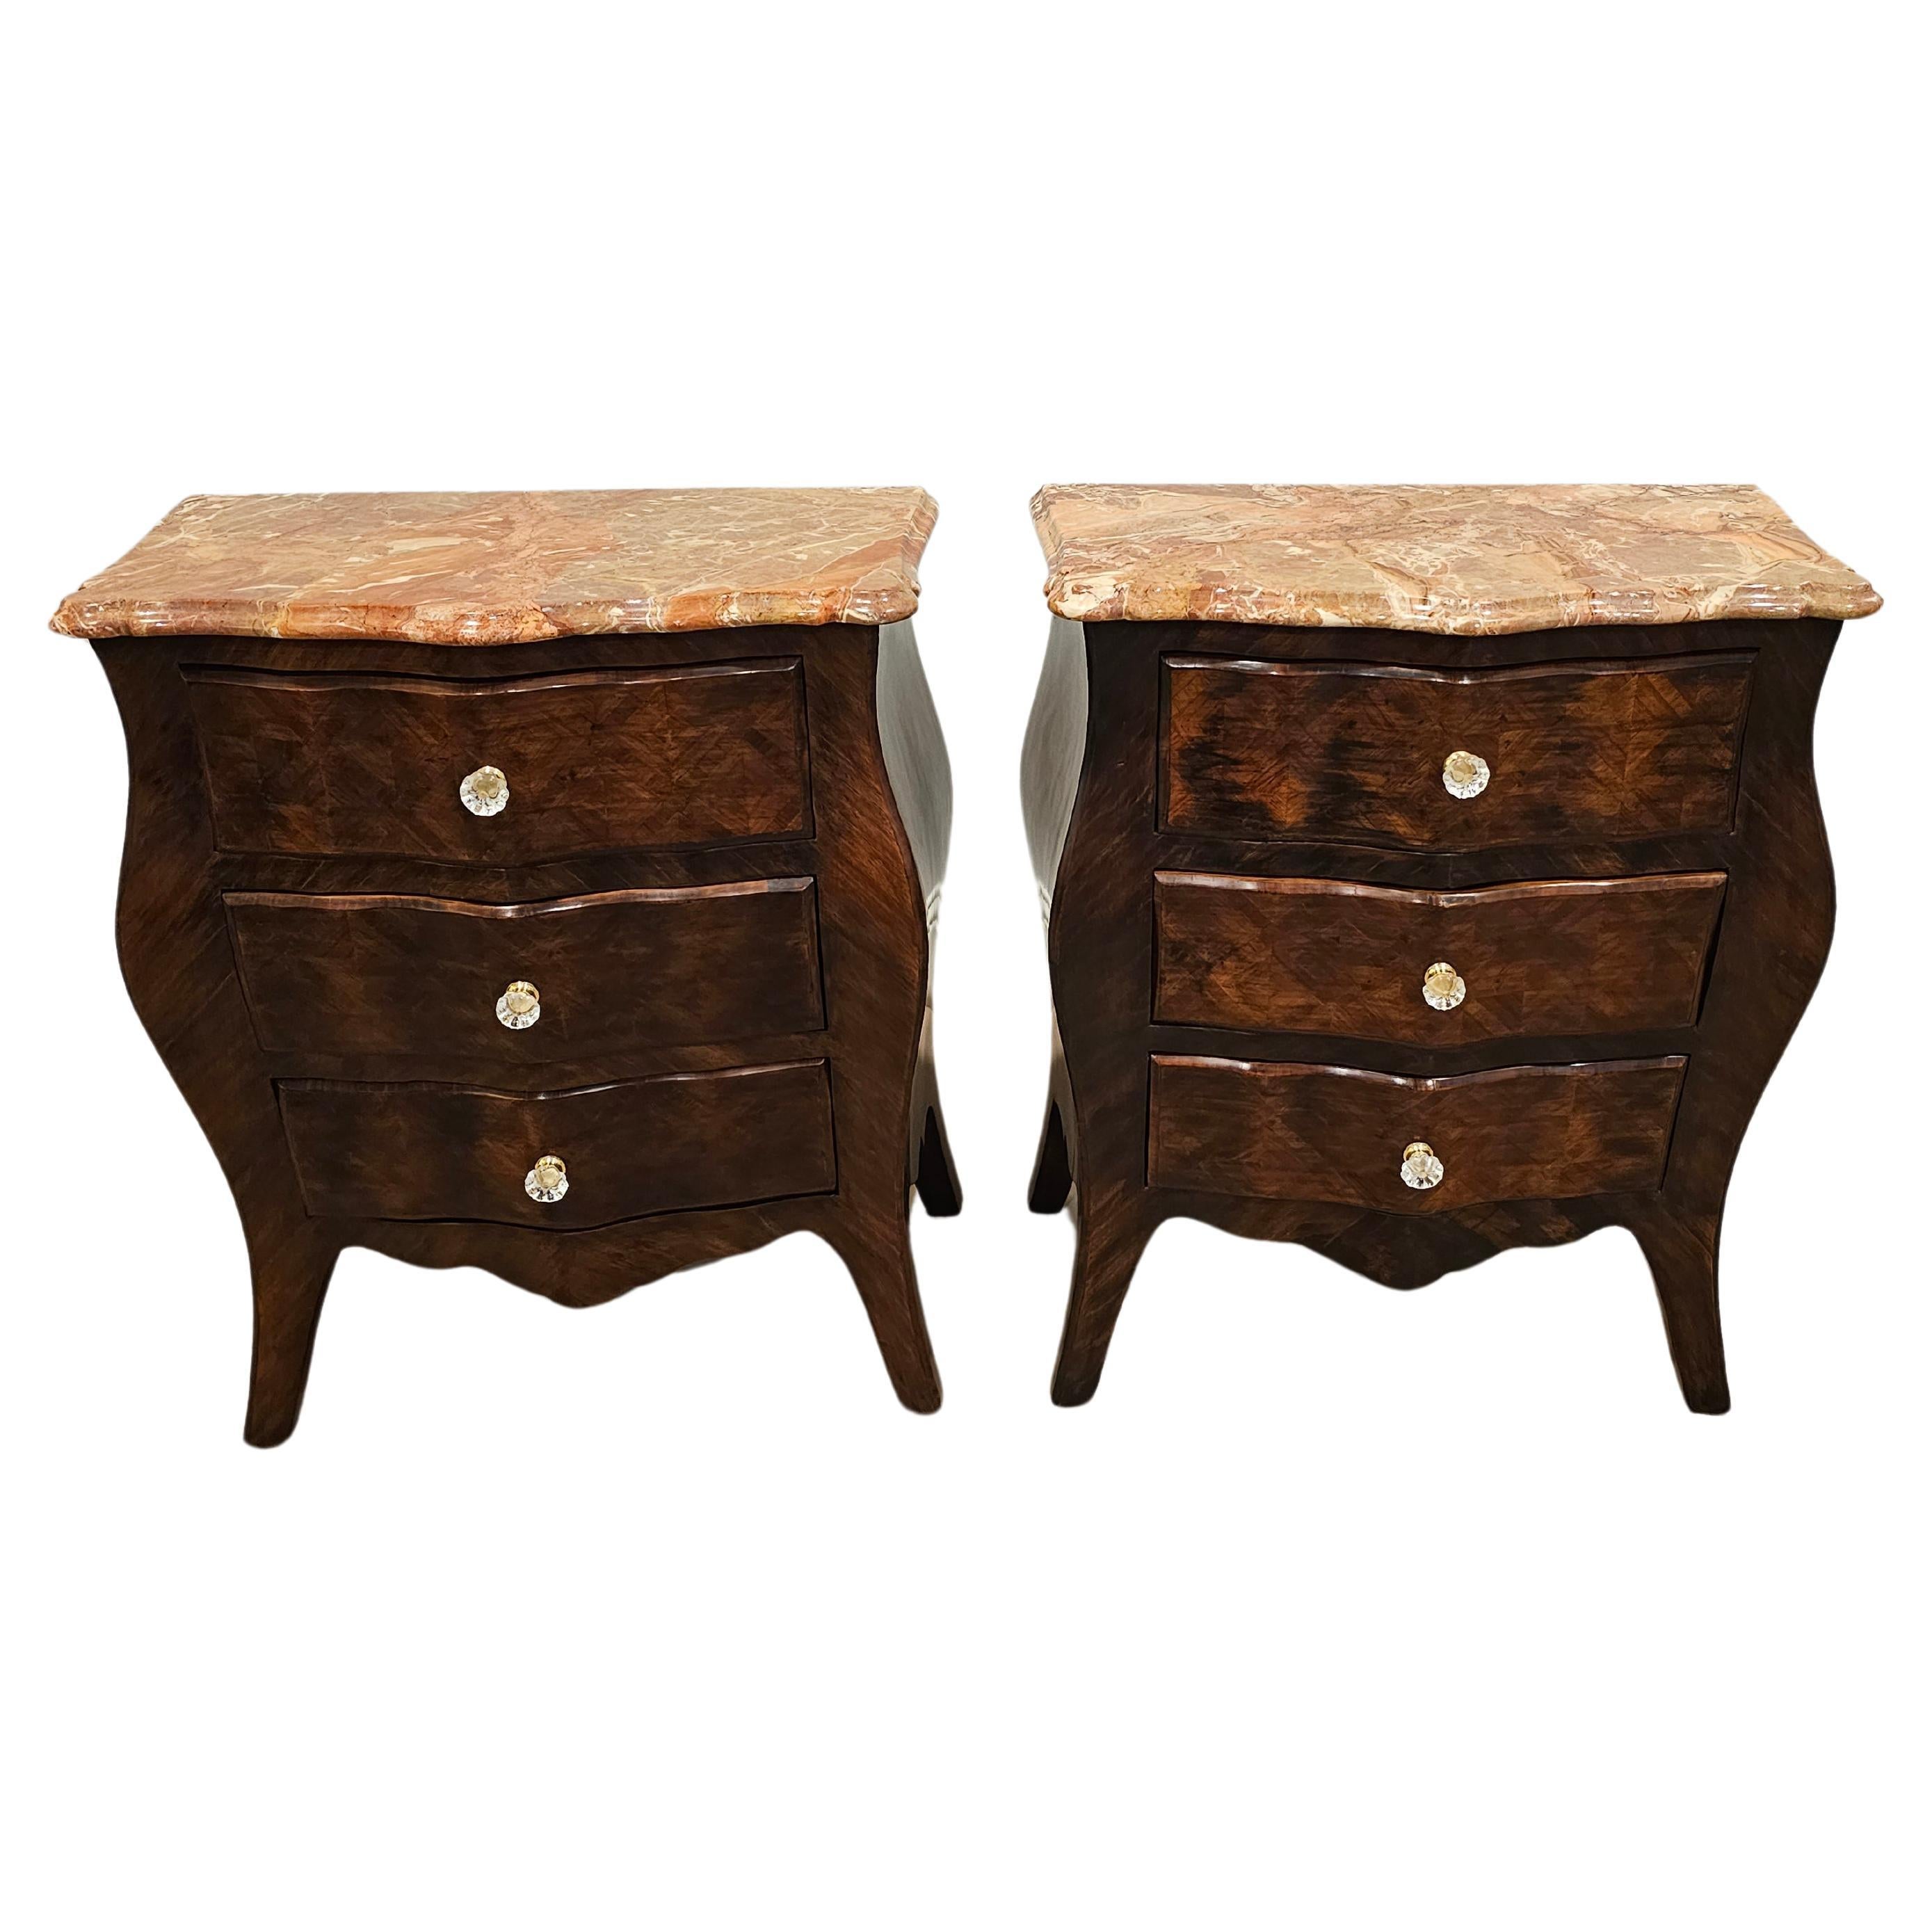 Antique Italian Louis XV Style Bombe Chest Of Drawers Nightstand Pair For Sale